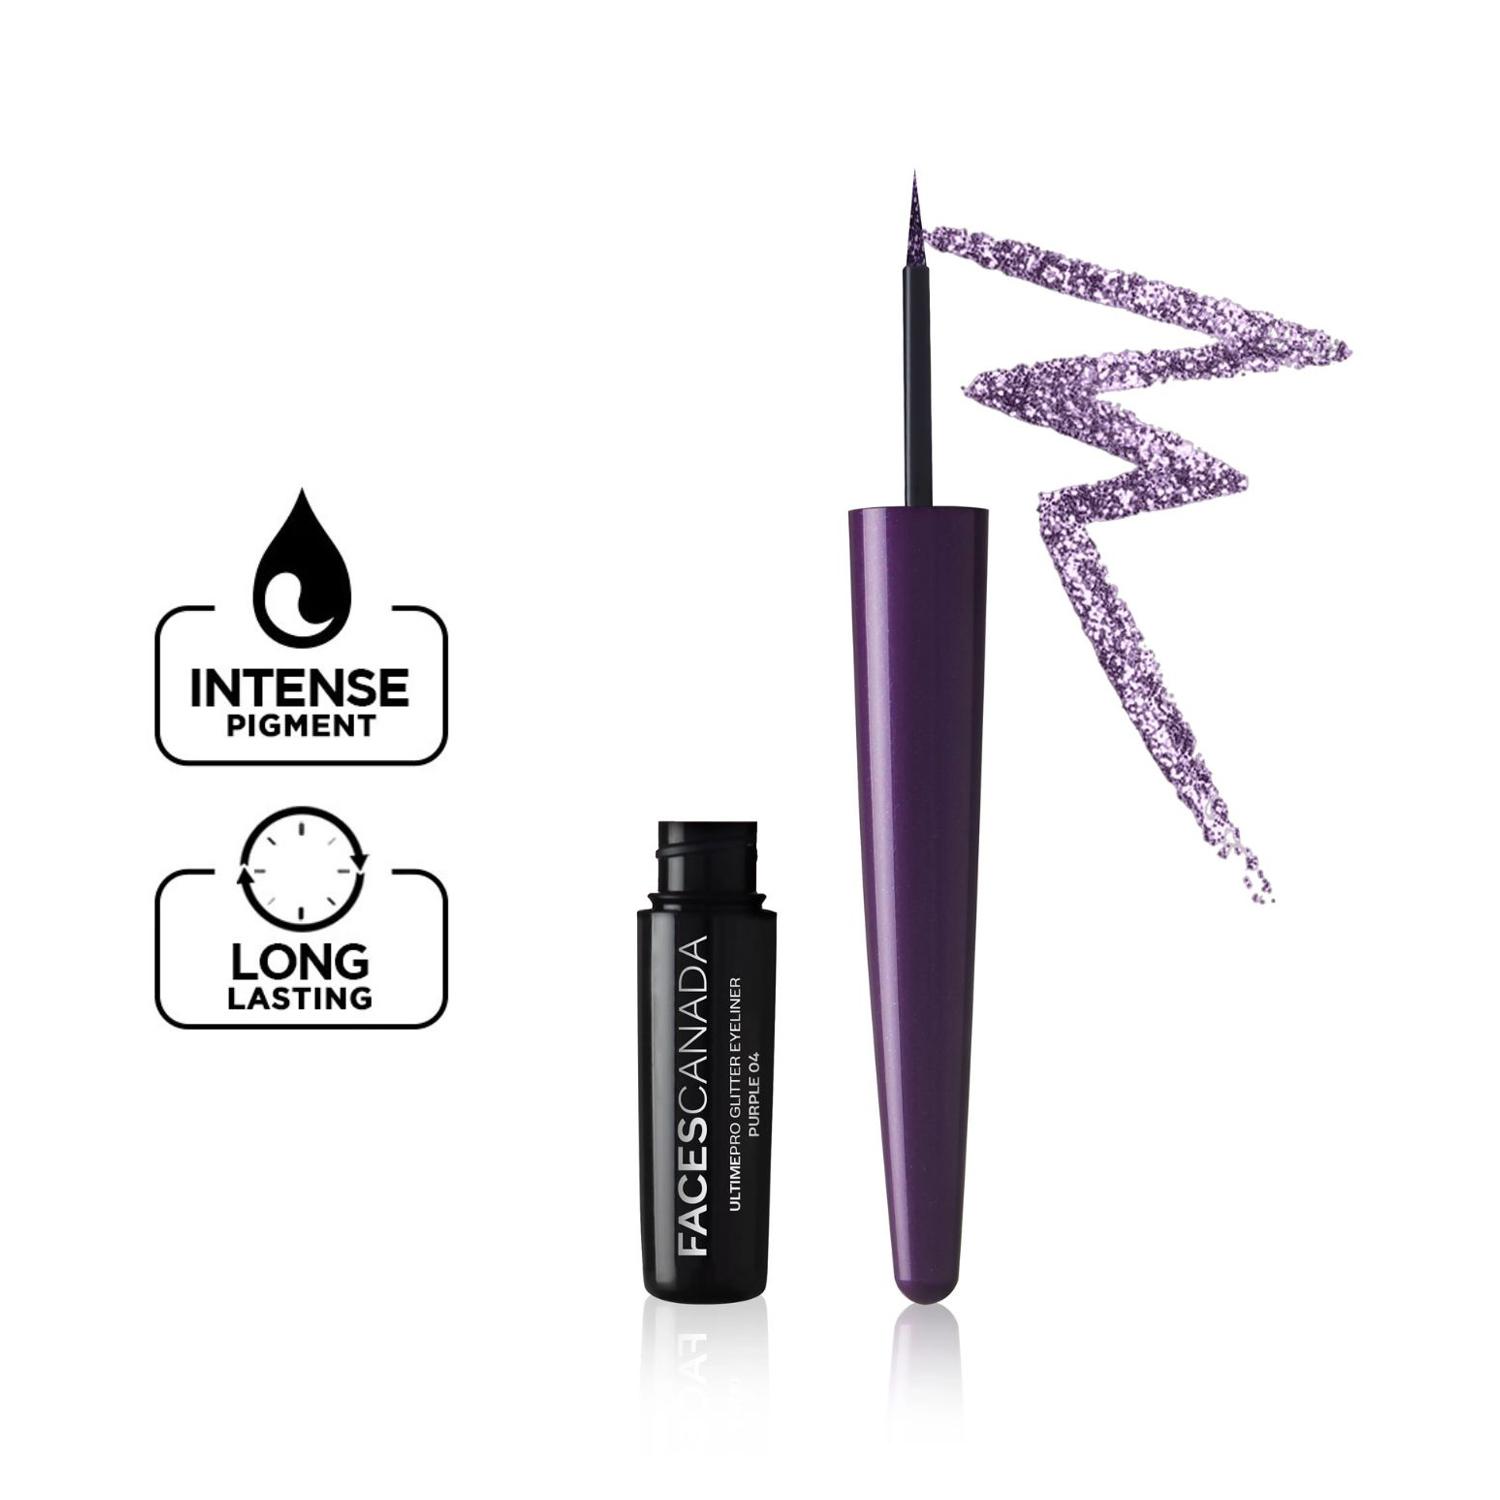 Faces Canada | Faces Canada Ultime Pro Glitter Eyeliner - Purple 04, Shimmery Finish, Long-Lasting (1.7 ml)